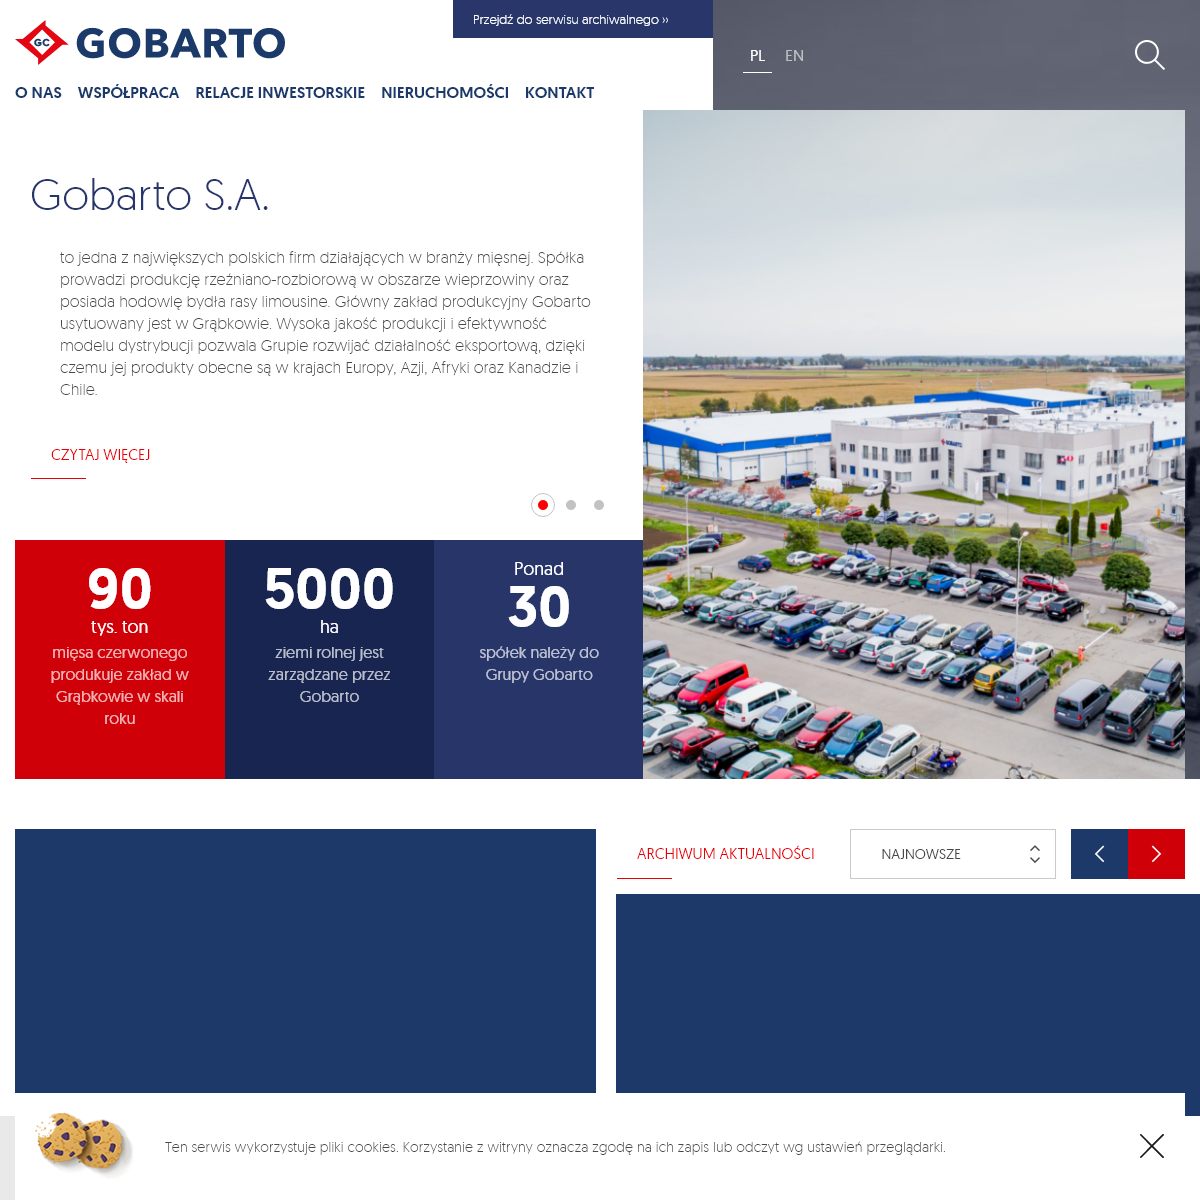 A complete backup of gobarto.pl